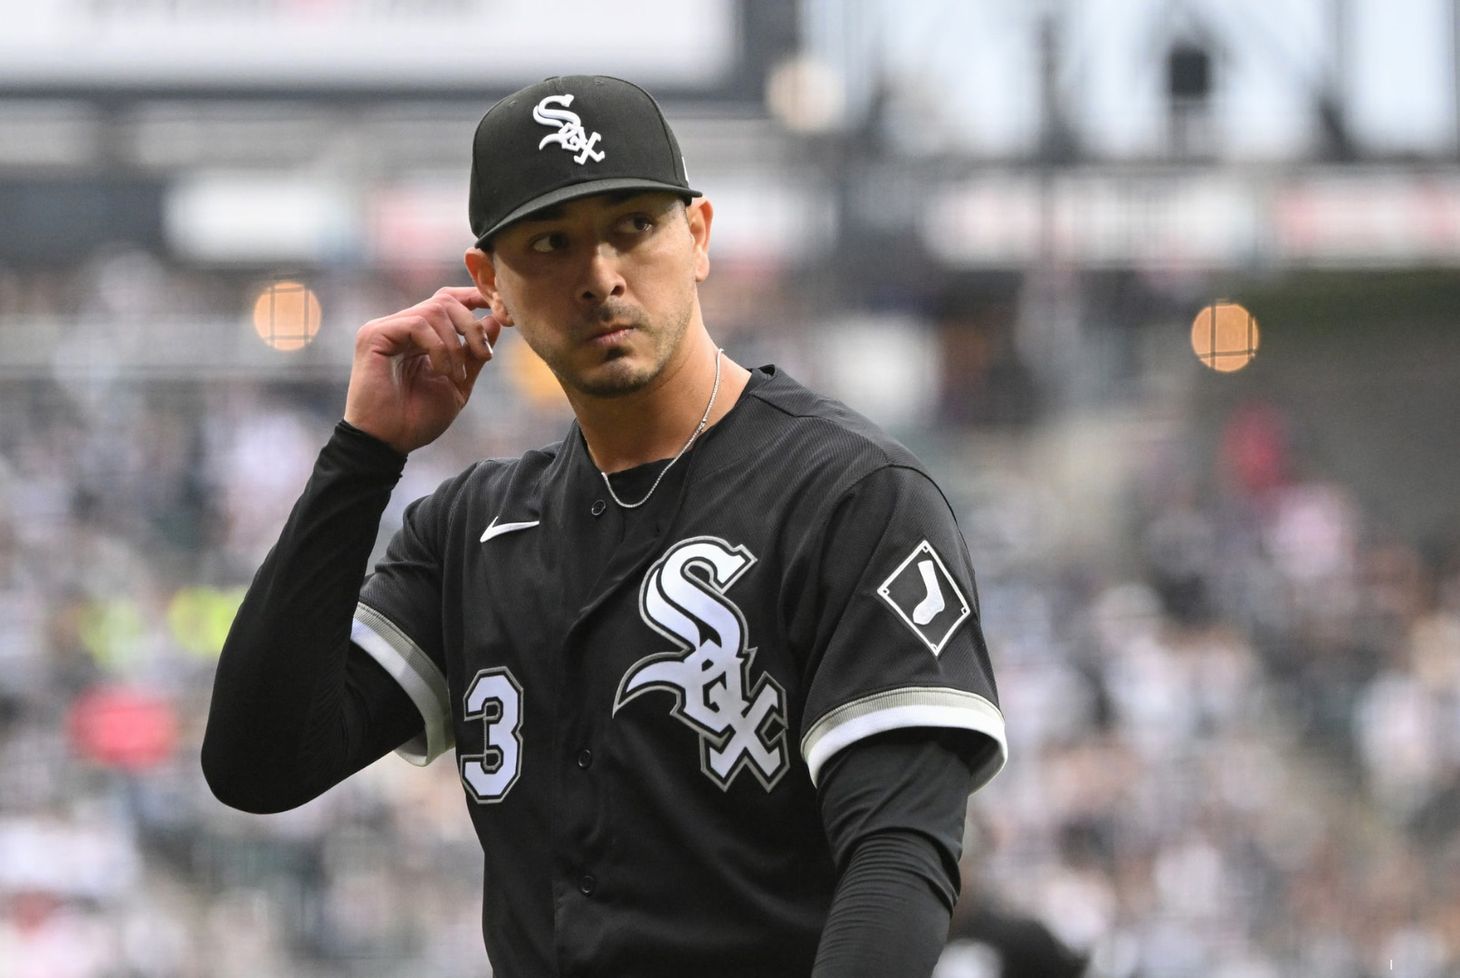 Anderson, Robert homer in rainy 4-0 White Sox win over Angels